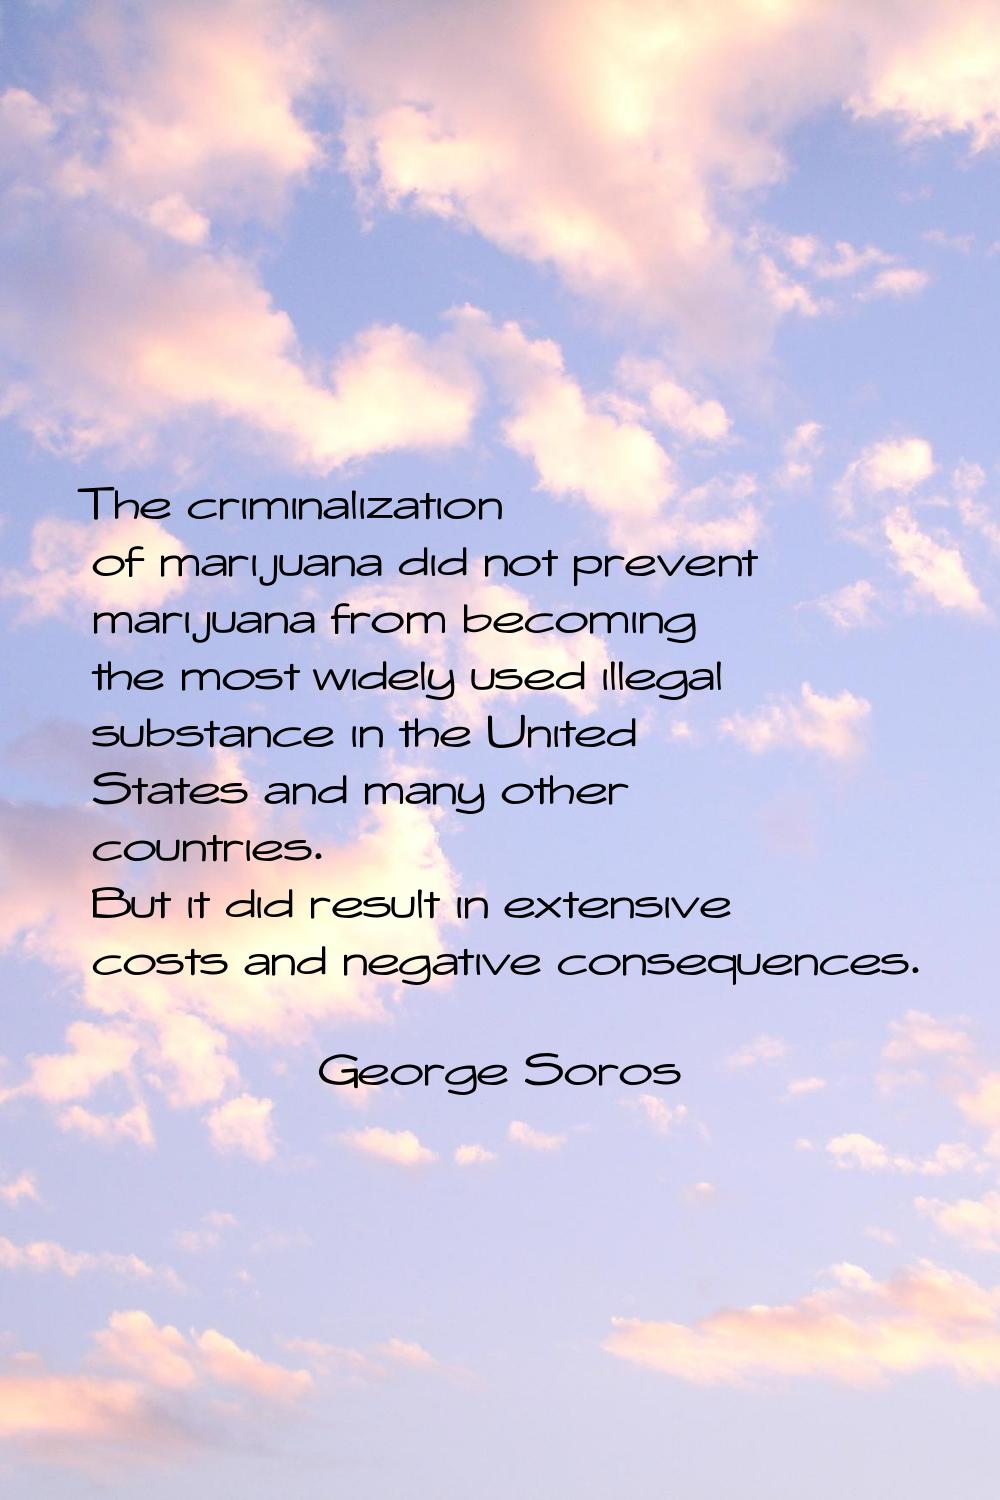 The criminalization of marijuana did not prevent marijuana from becoming the most widely used illeg